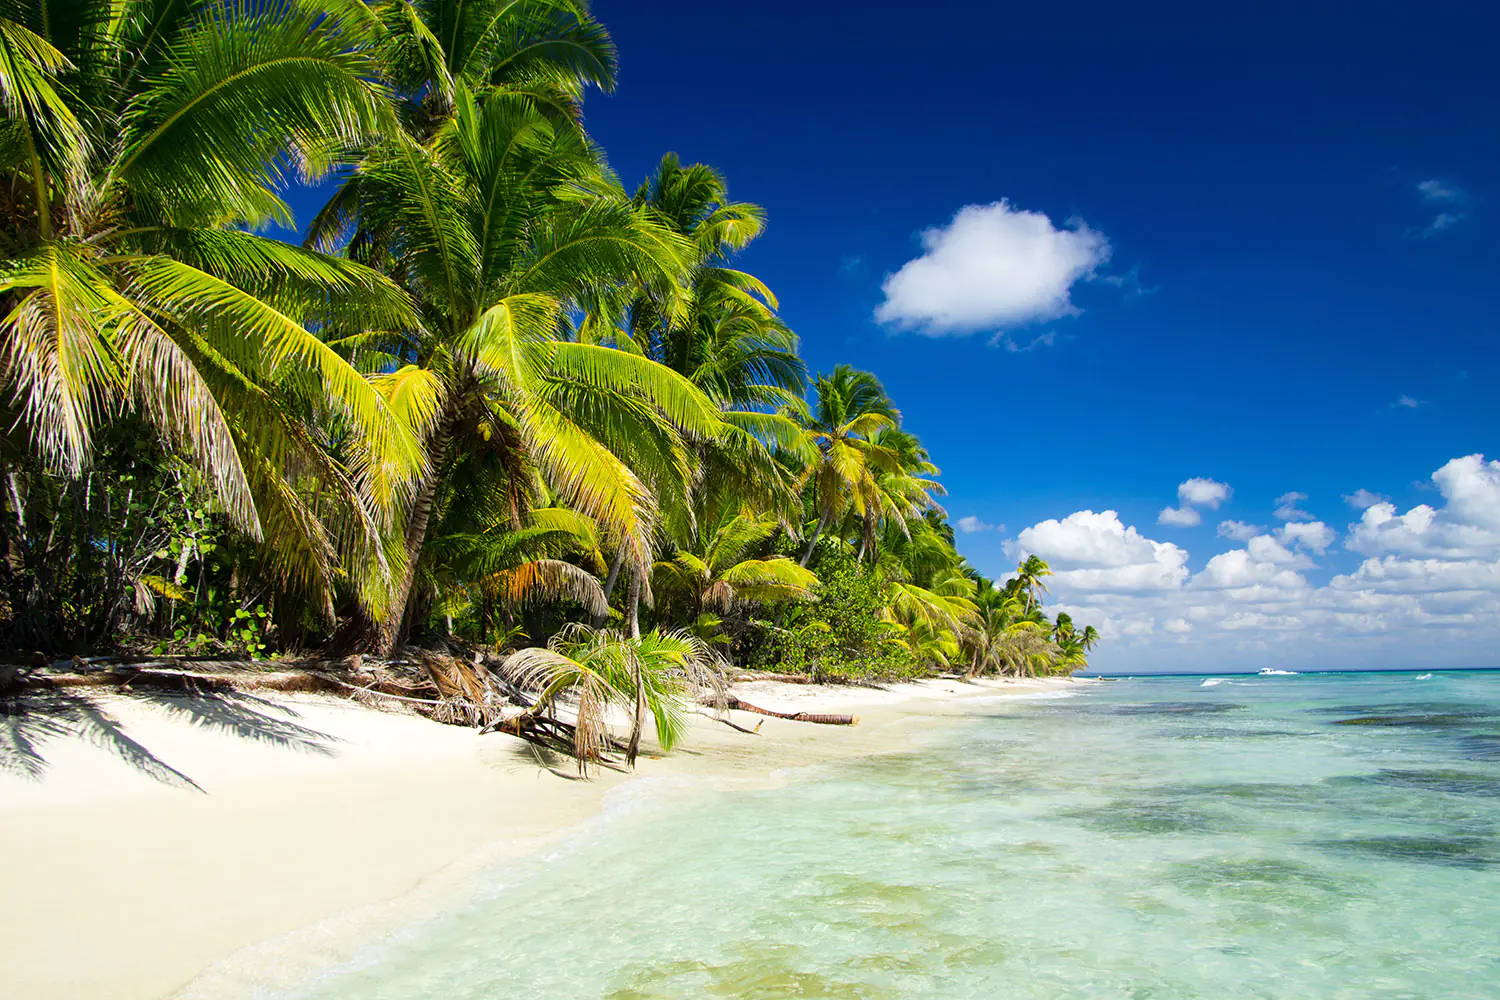 Wall Mural Photo Wallpaper The Deserted Island